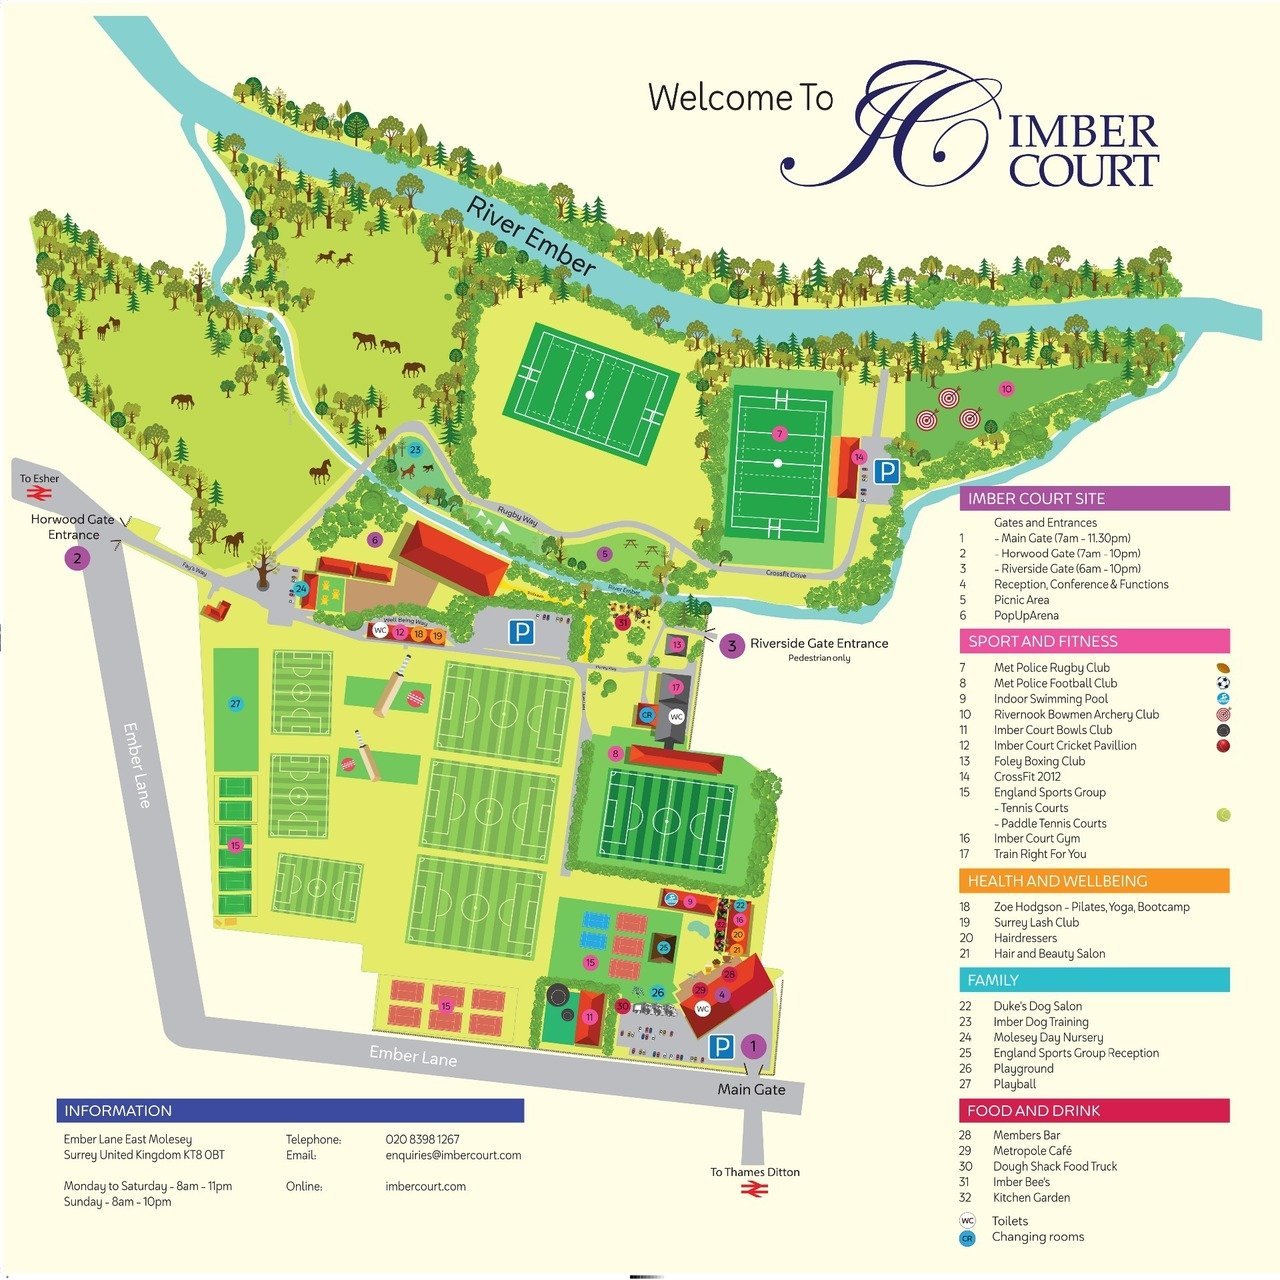 A map of the Imber Court grounds